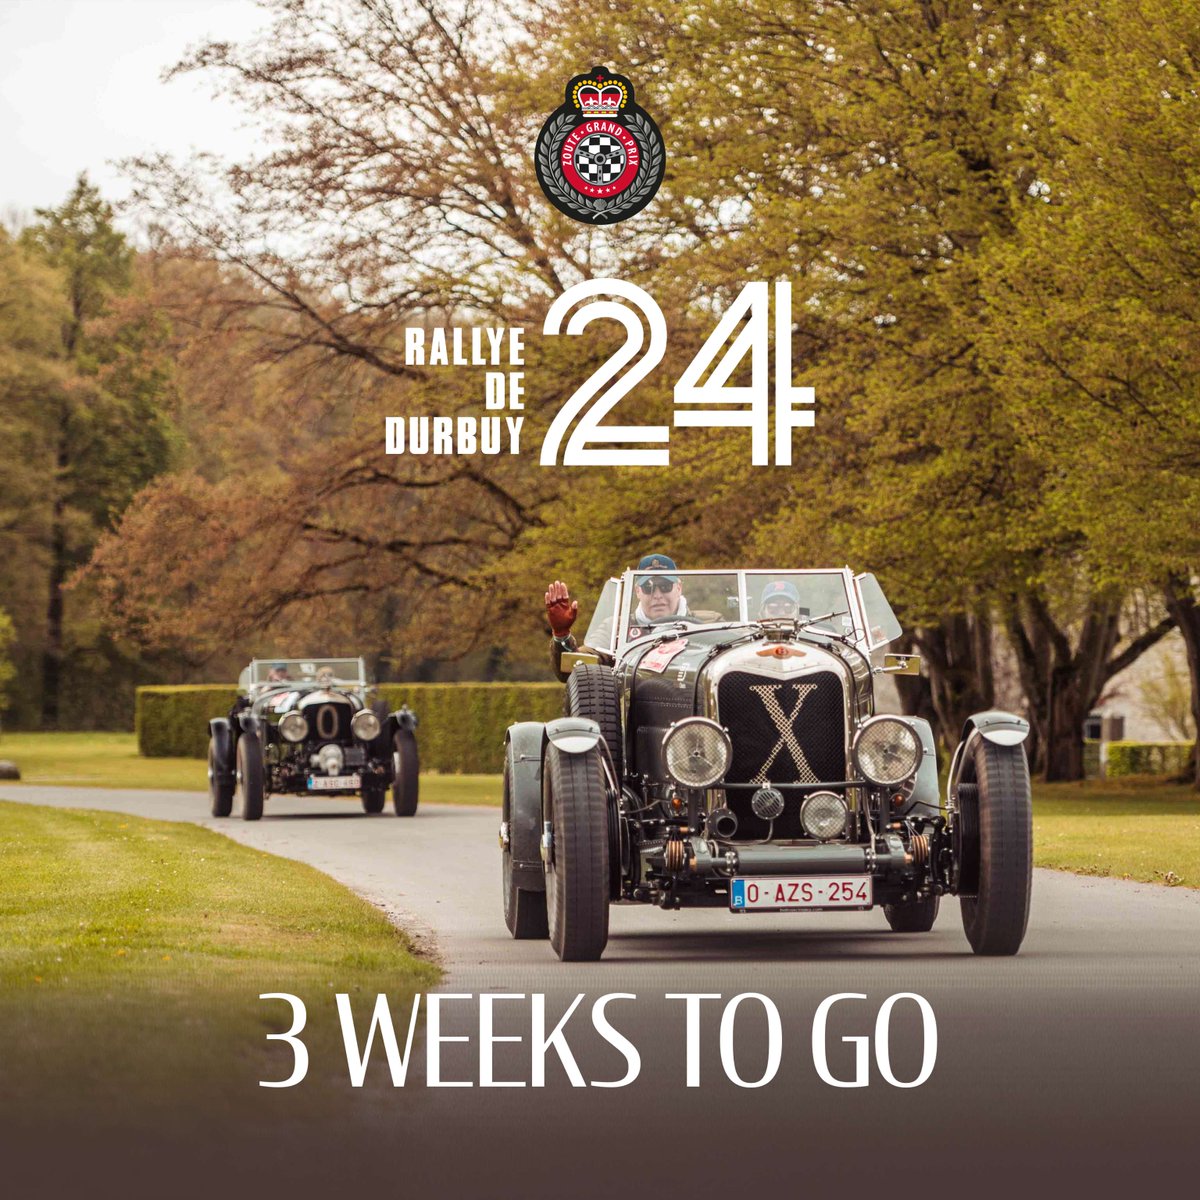 RALLYE DE DURBUY 🏁 Enjoy a fantastic three-day event of sheer driving pleasure with the charm and grandeur of the great classics, in Durbuy. A feast for all senses, not to be missed by petrolheads | Save your spot 👉🏼 ow.ly/3ila50QJRCt #ZouteGrandPrix #zgp #countdown